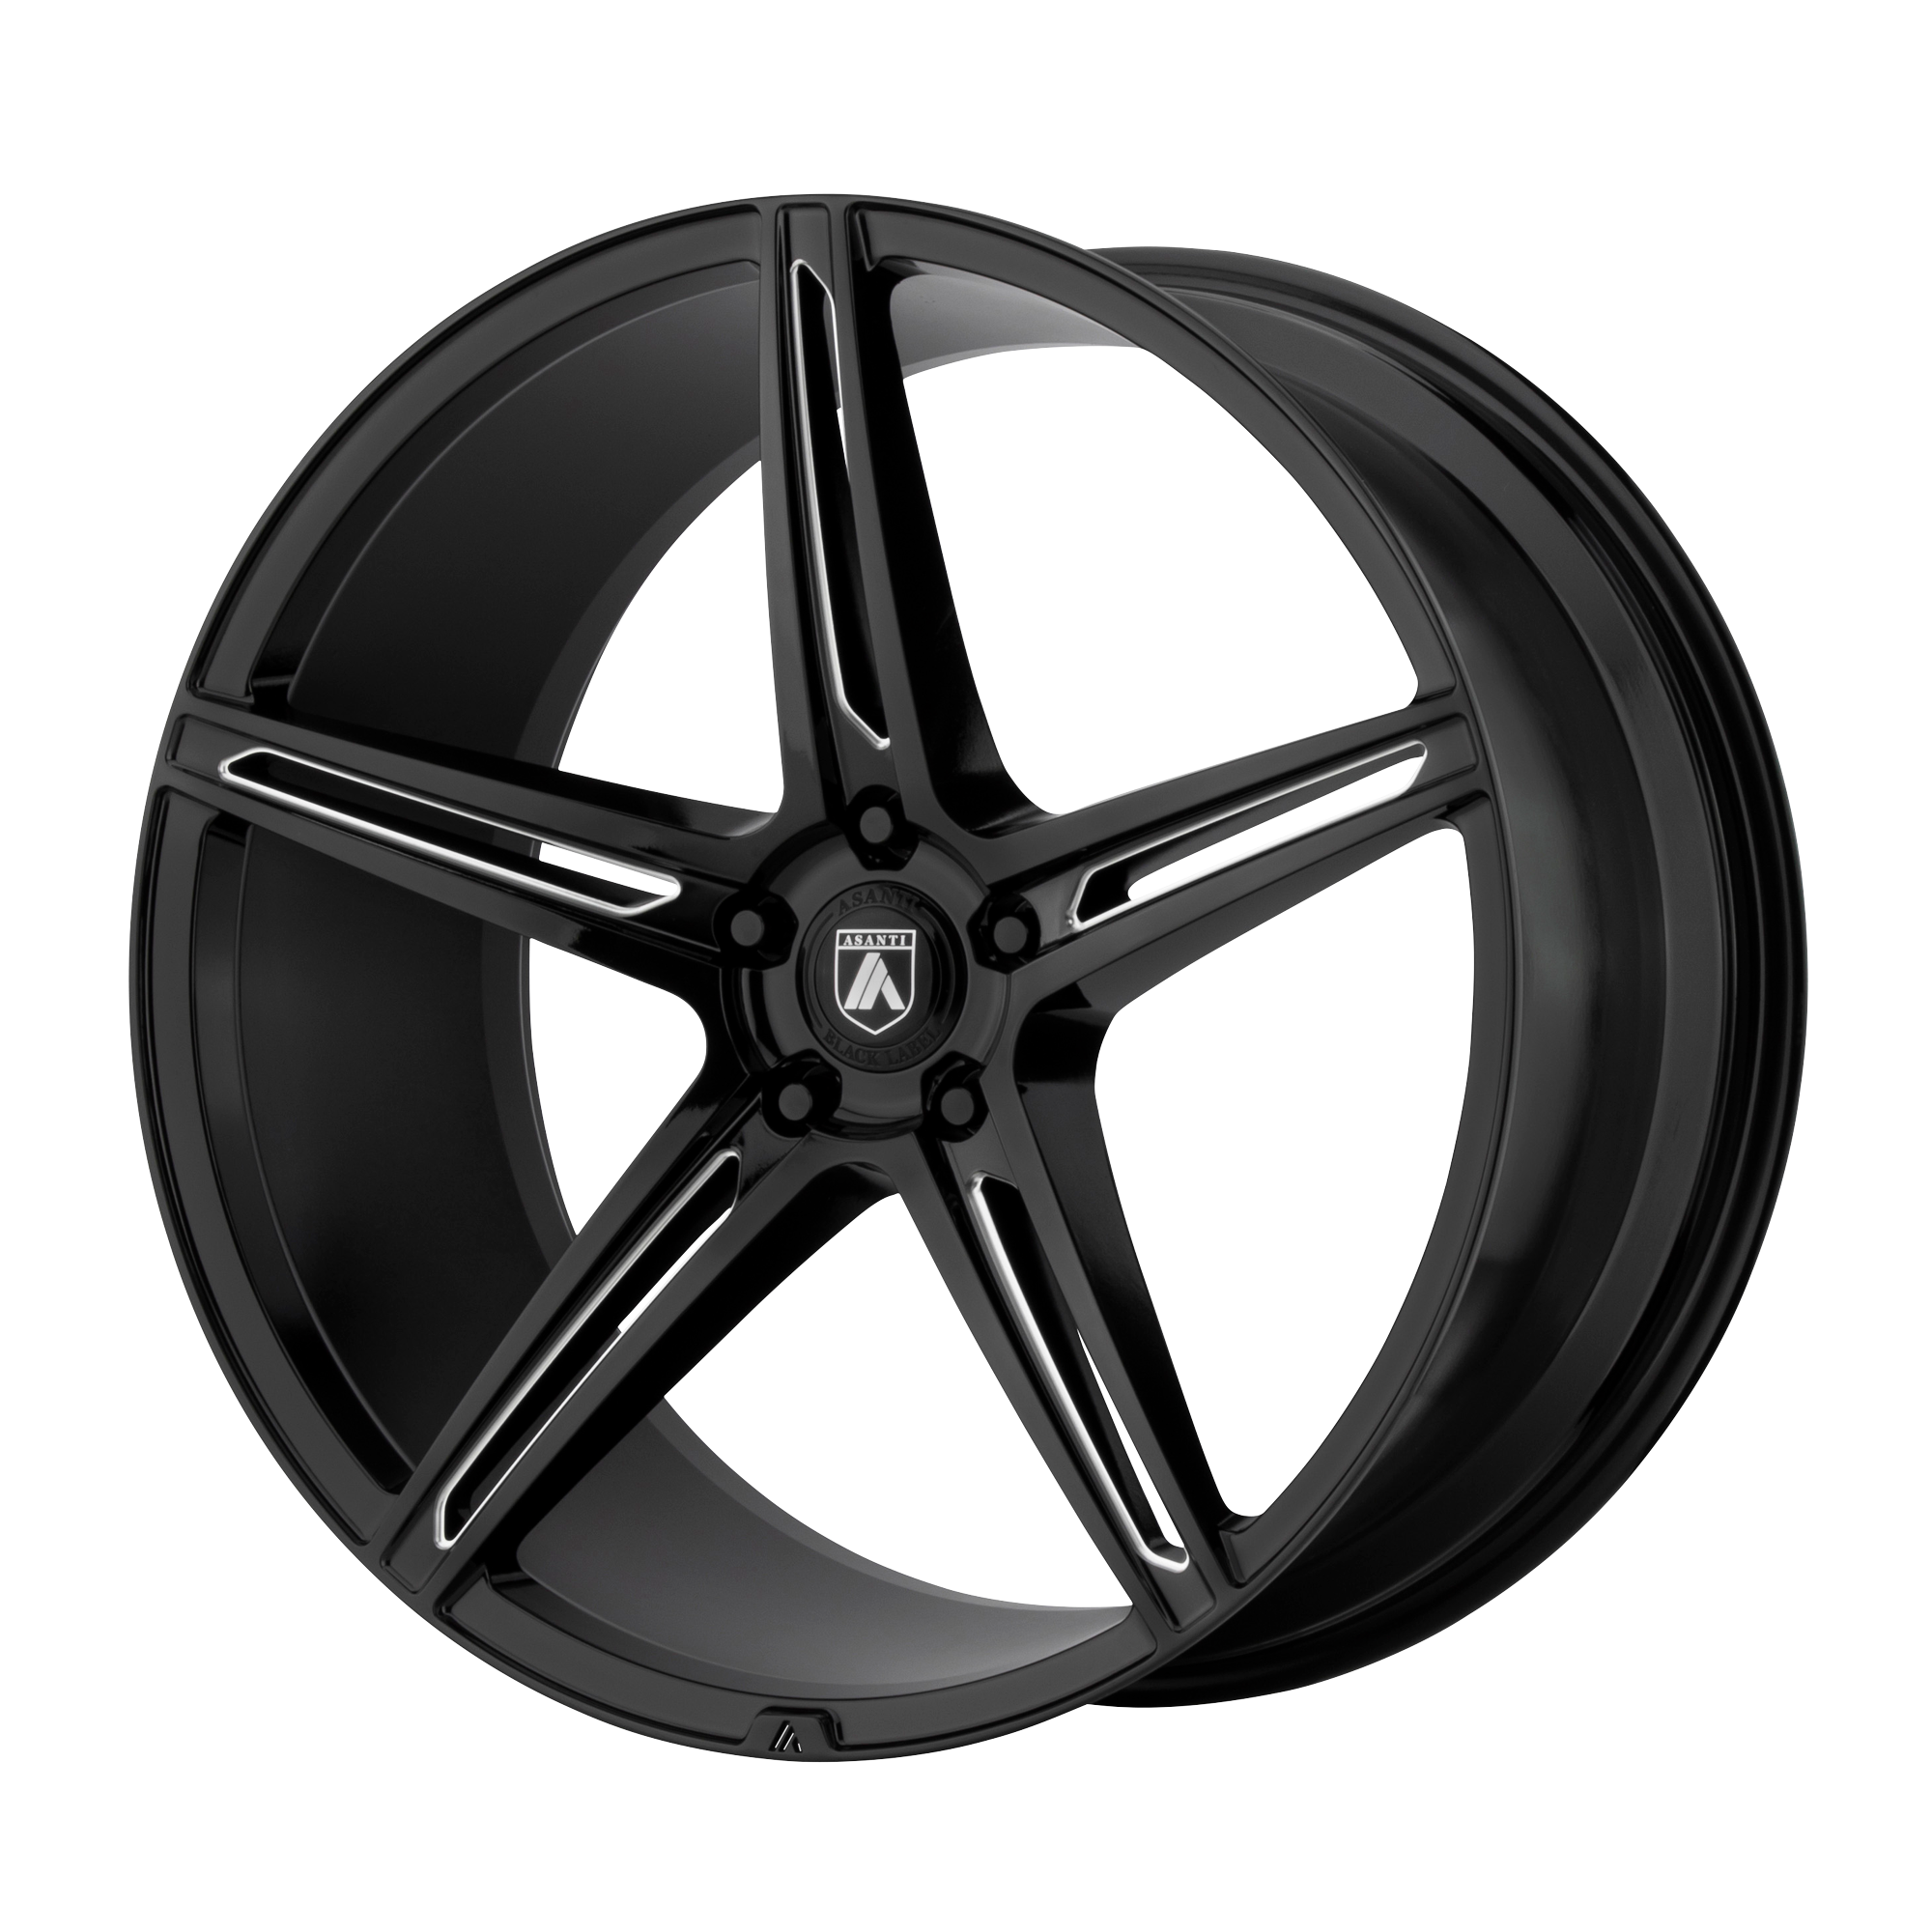 ALPHA 5 20x10.5 Blank GLOSS BLACK MILLED (20 mm) - Tires and Engine Performance